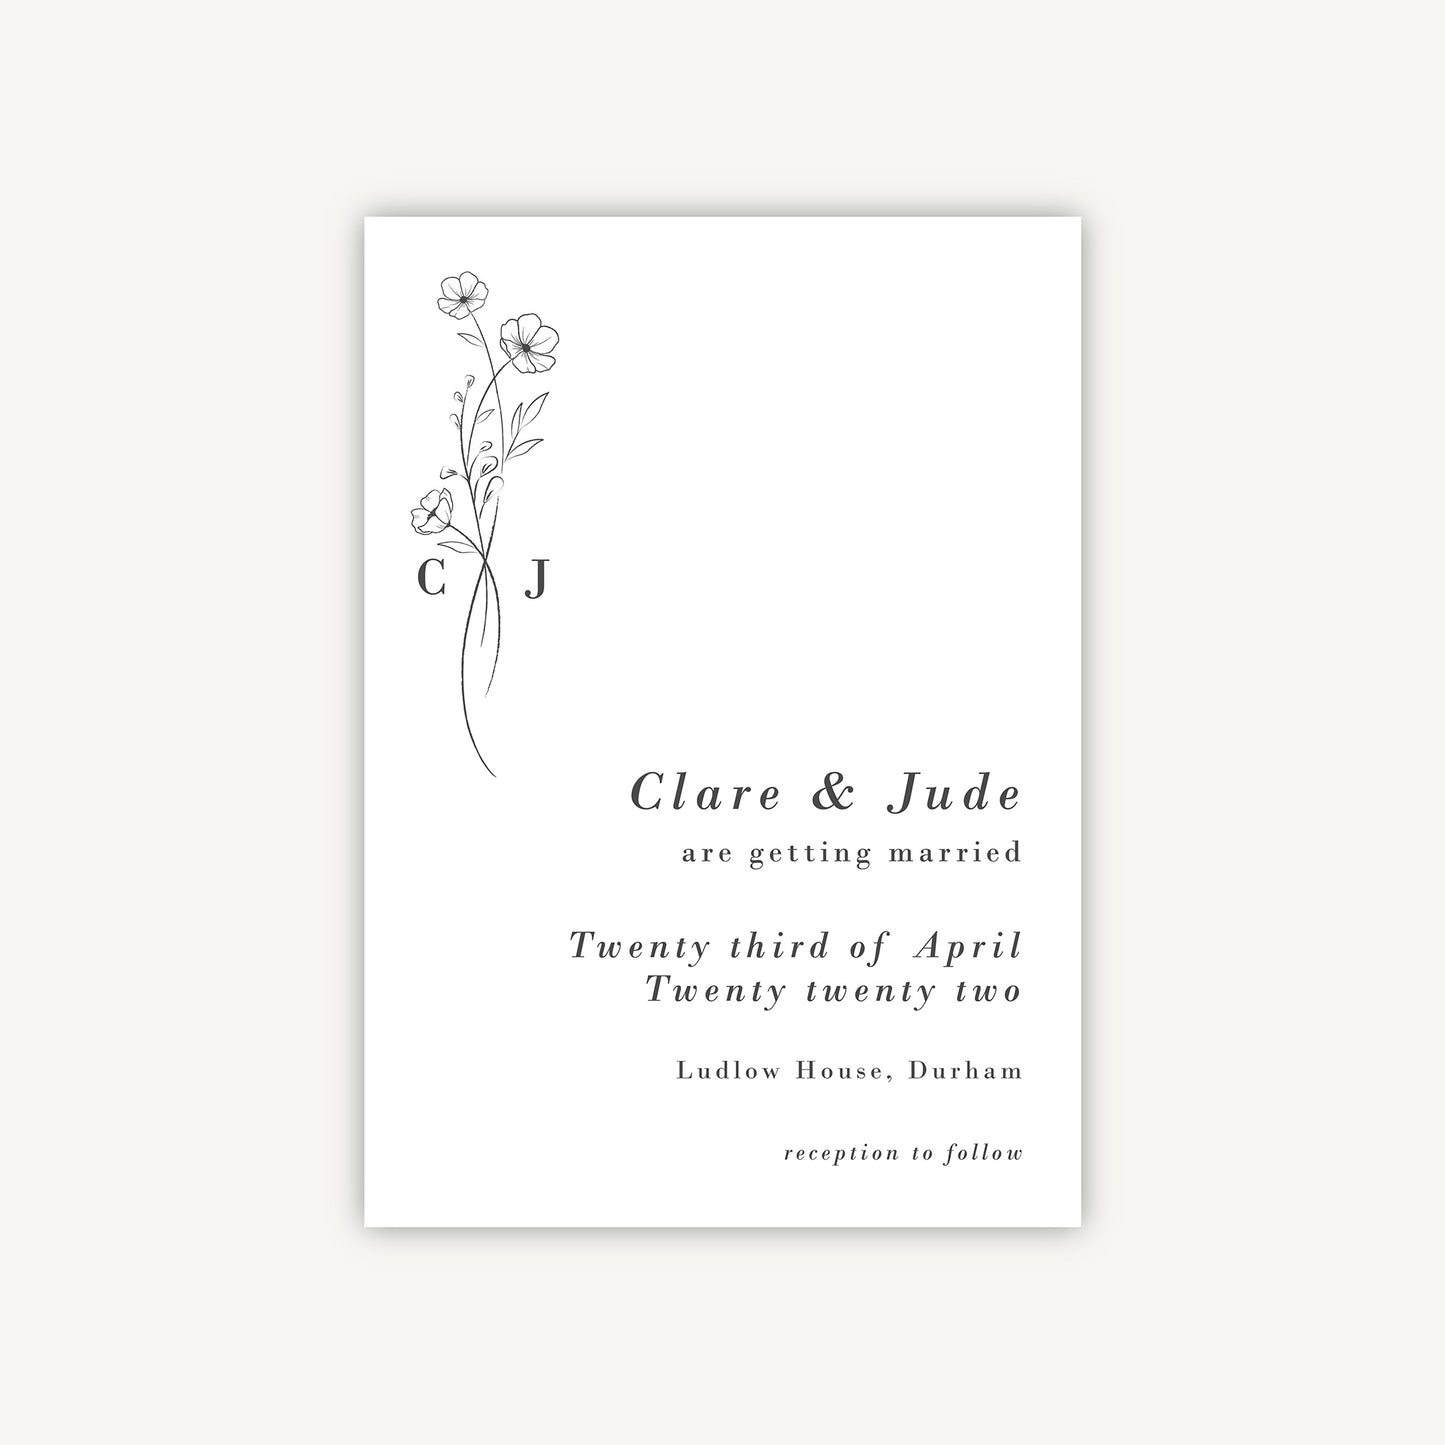 Simple Floral Wedding Save the Date